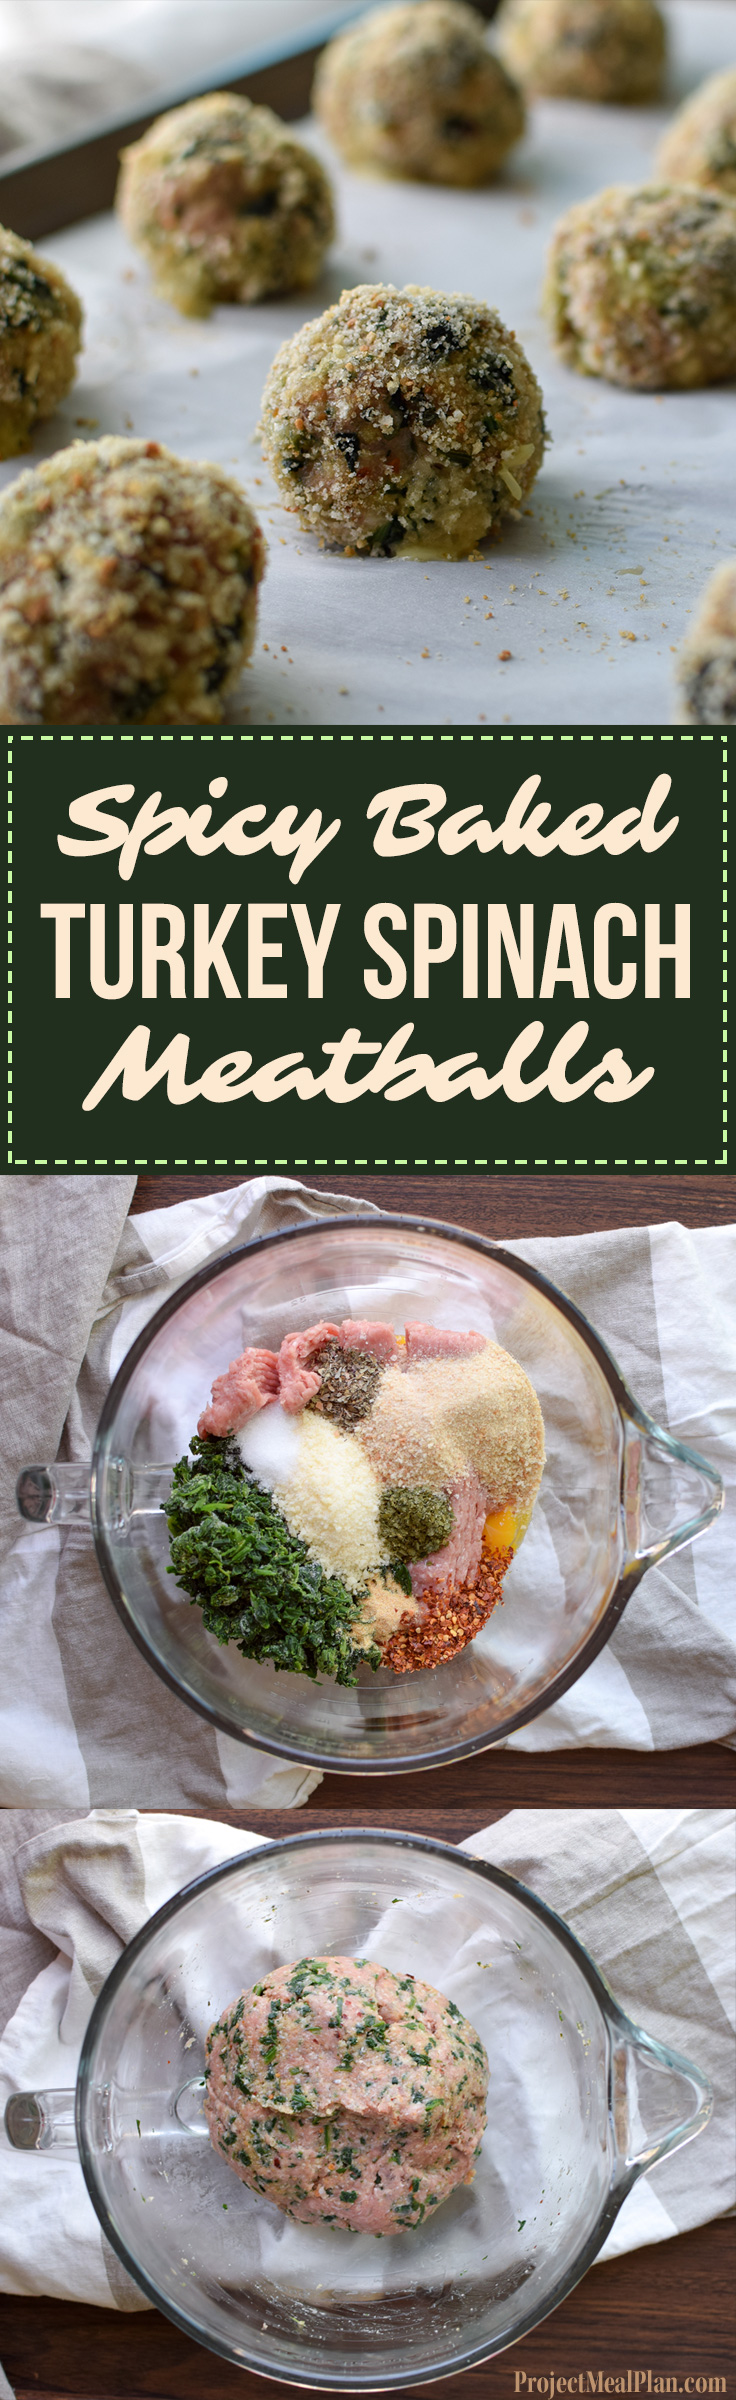 Spicy Baked Turkey Spinach Meatballs recipe - Ground turkey + spinach +all the right spices and a little heat make the best meatballs ever! - ProjectMealPlan.com